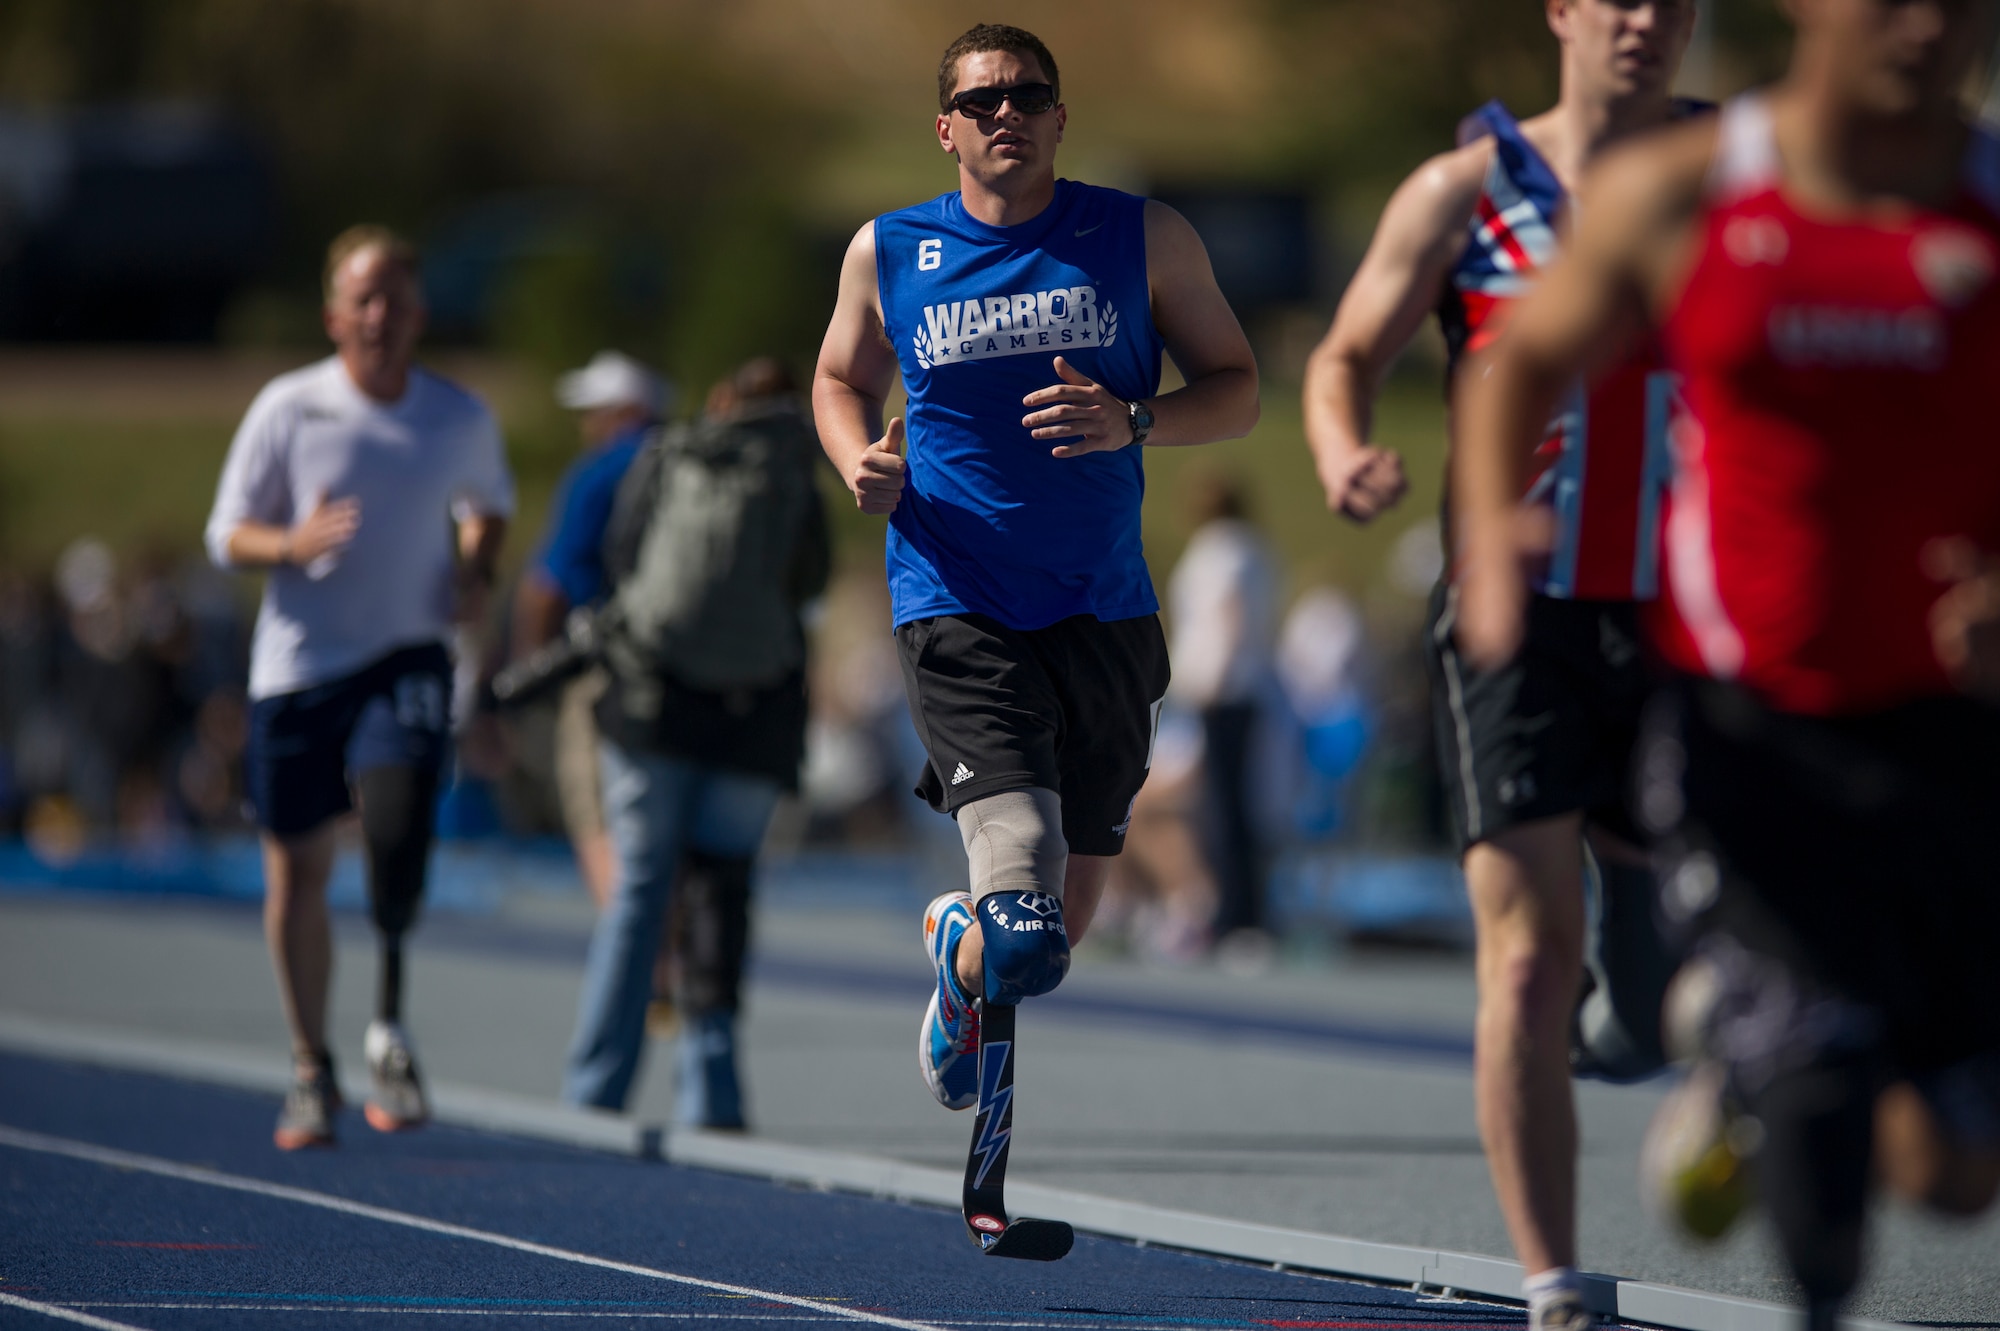 First Lt. Ryan McGuire, Joint Base Lewis-McChord C-17 pilot, runs the 1,500-meter run and earns a gold medal at the 2012 Warrior Games held at the U.S. Air Force Academy, Colorado Springs, Colo. McGuire won a total of five medals at the 2012 Warrior Games to add to his three medals he won from the 2010 inaugural Warrior Games. (Courtesy photo) 